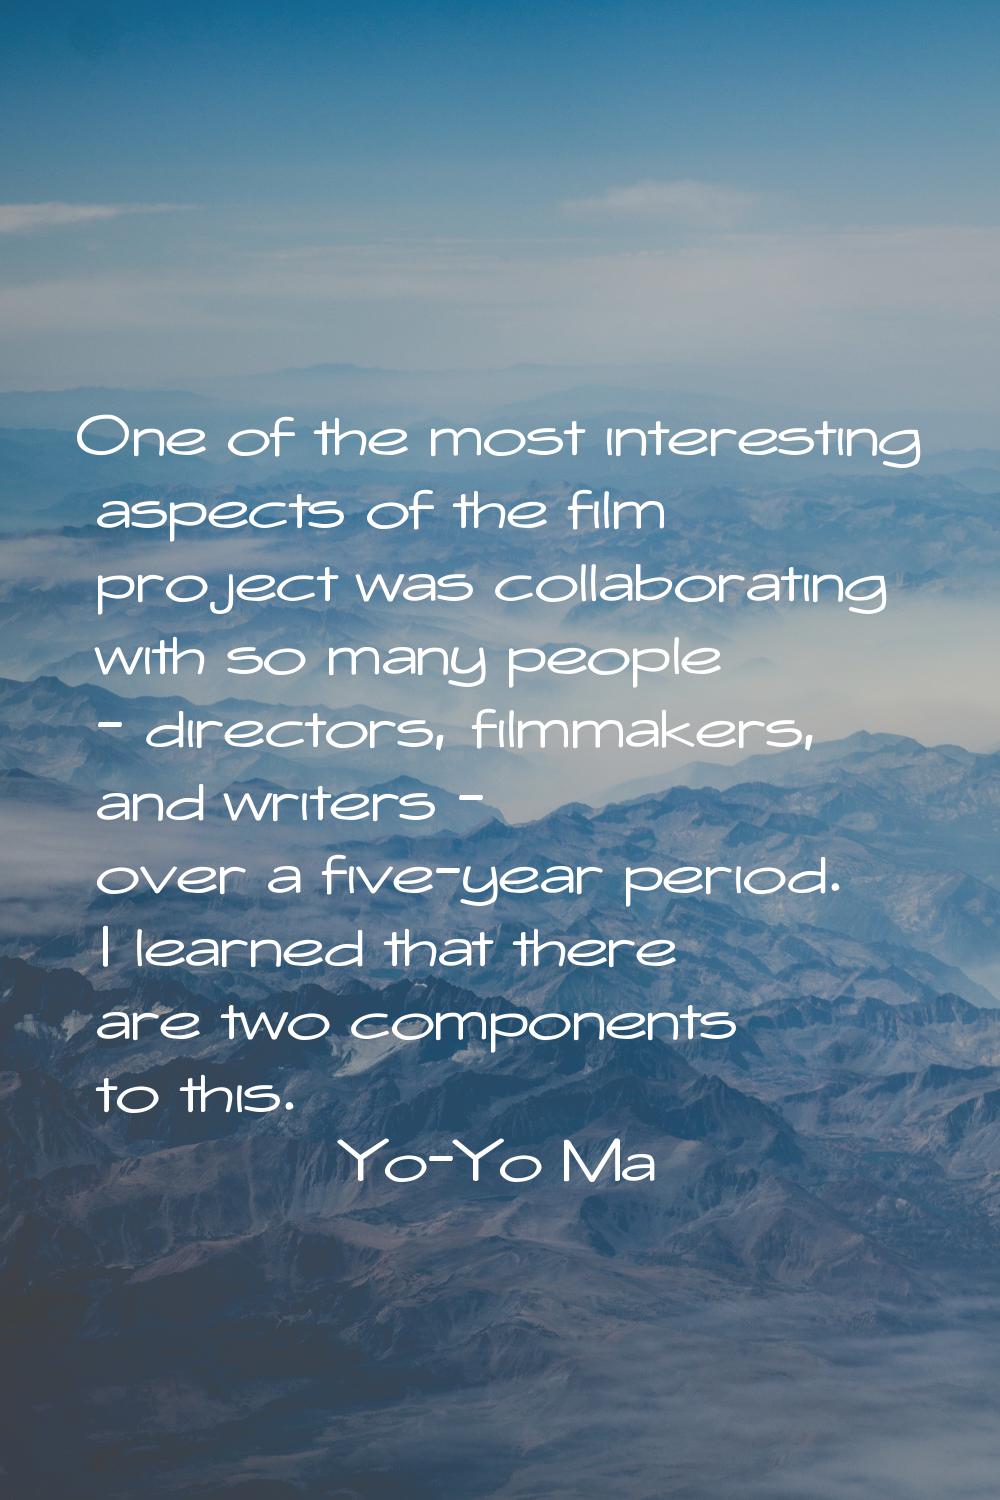 One of the most interesting aspects of the film project was collaborating with so many people - dir